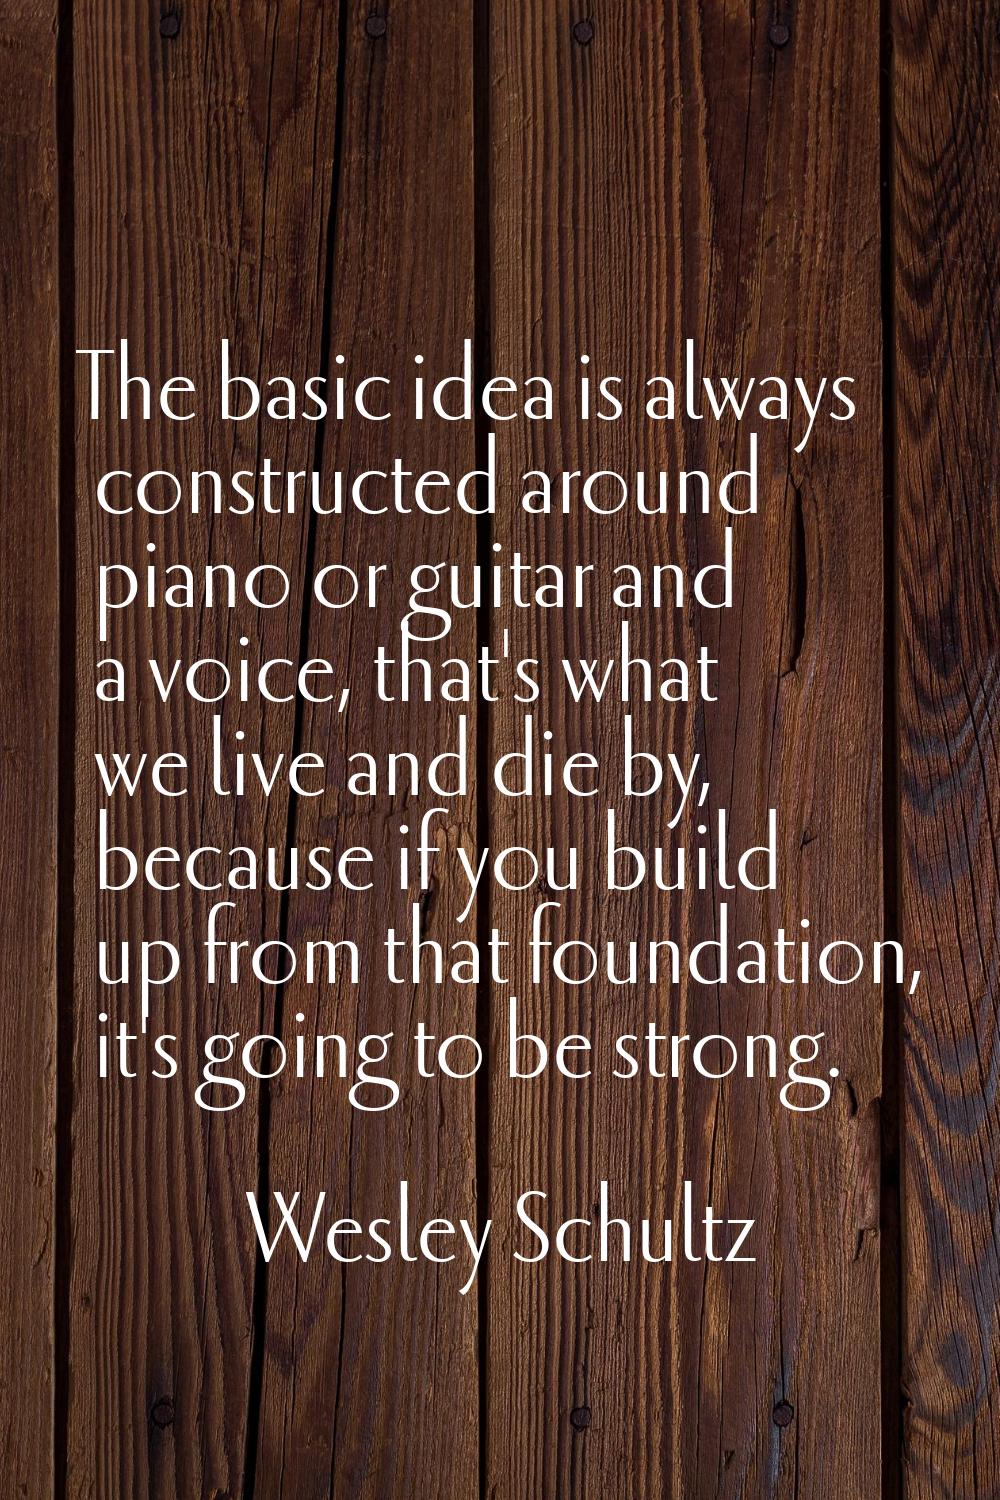 The basic idea is always constructed around piano or guitar and a voice, that's what we live and di